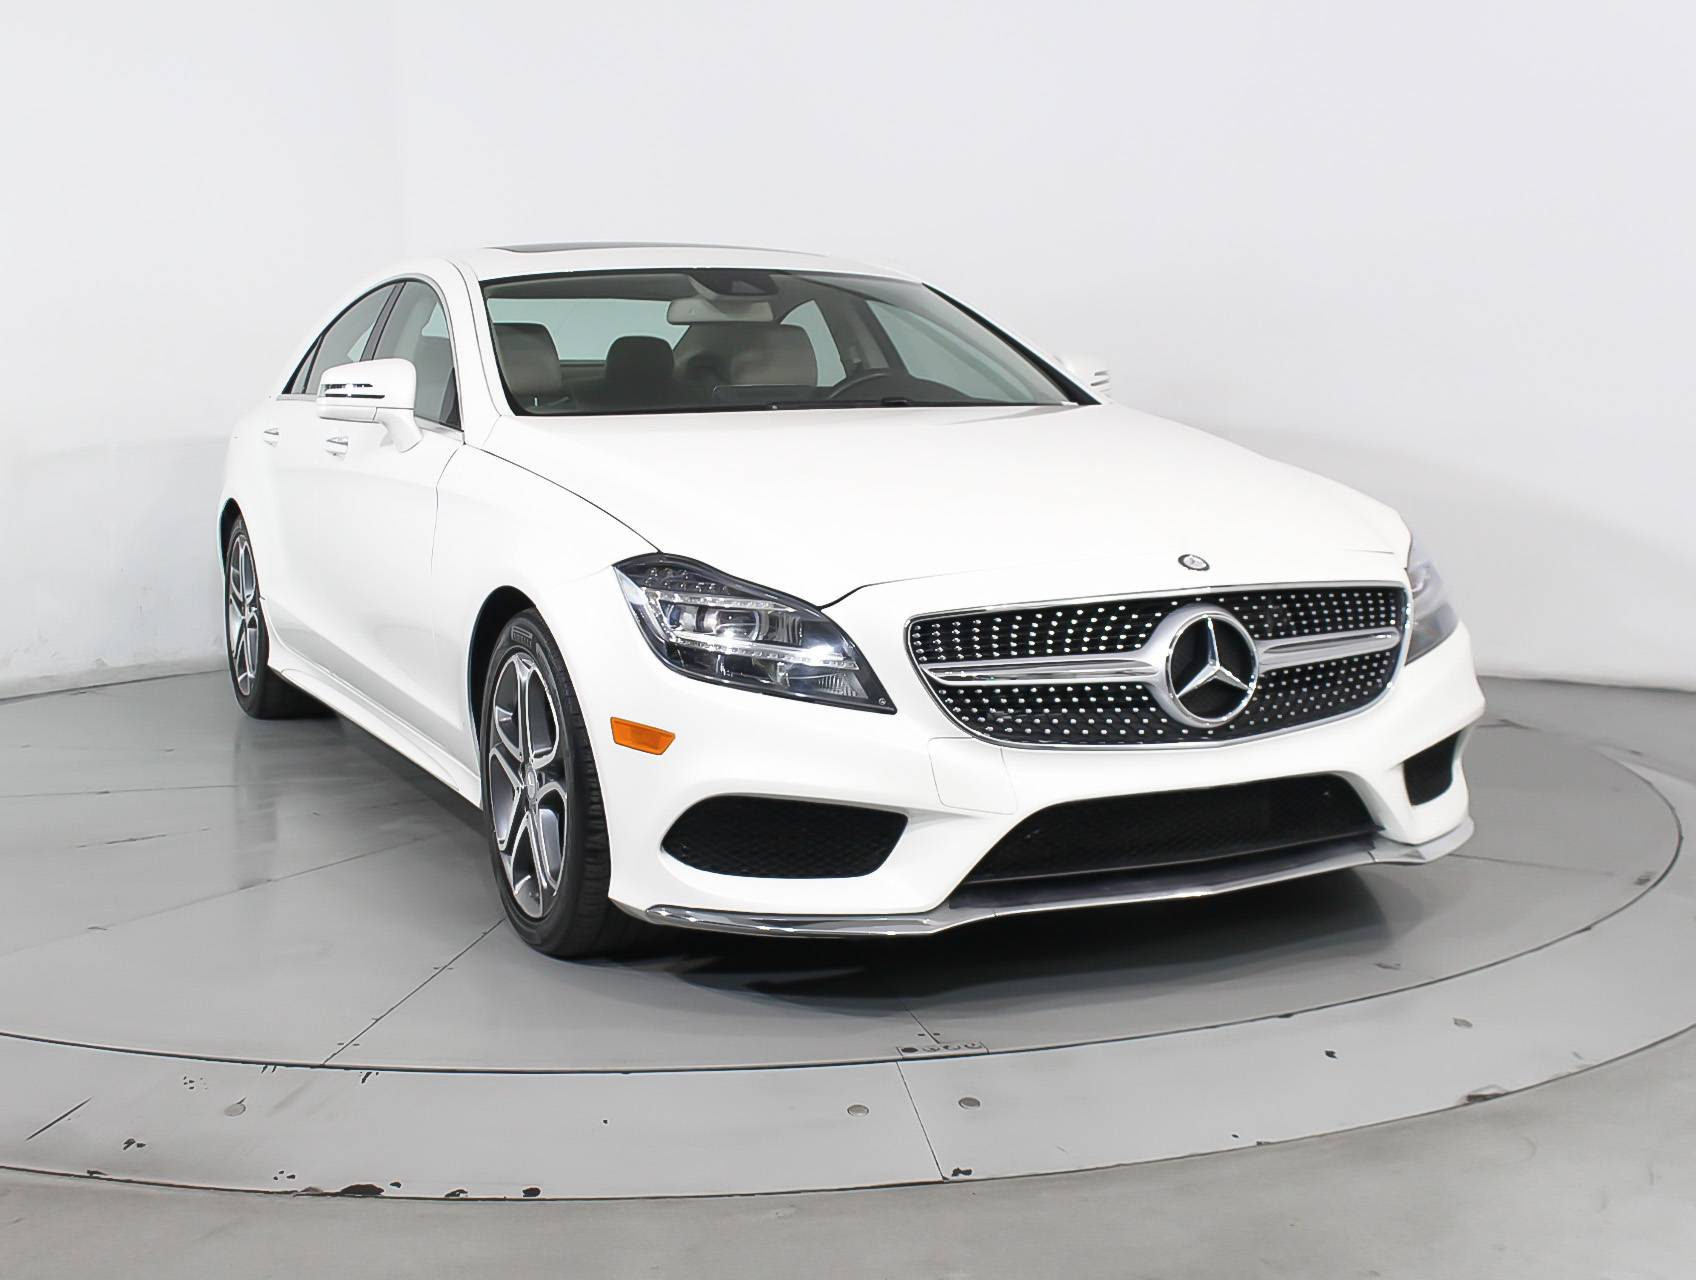 Florida Fine Cars - Used MERCEDES-BENZ CLS CLASS 2015 HOLLYWOOD CLS400 4MATIC